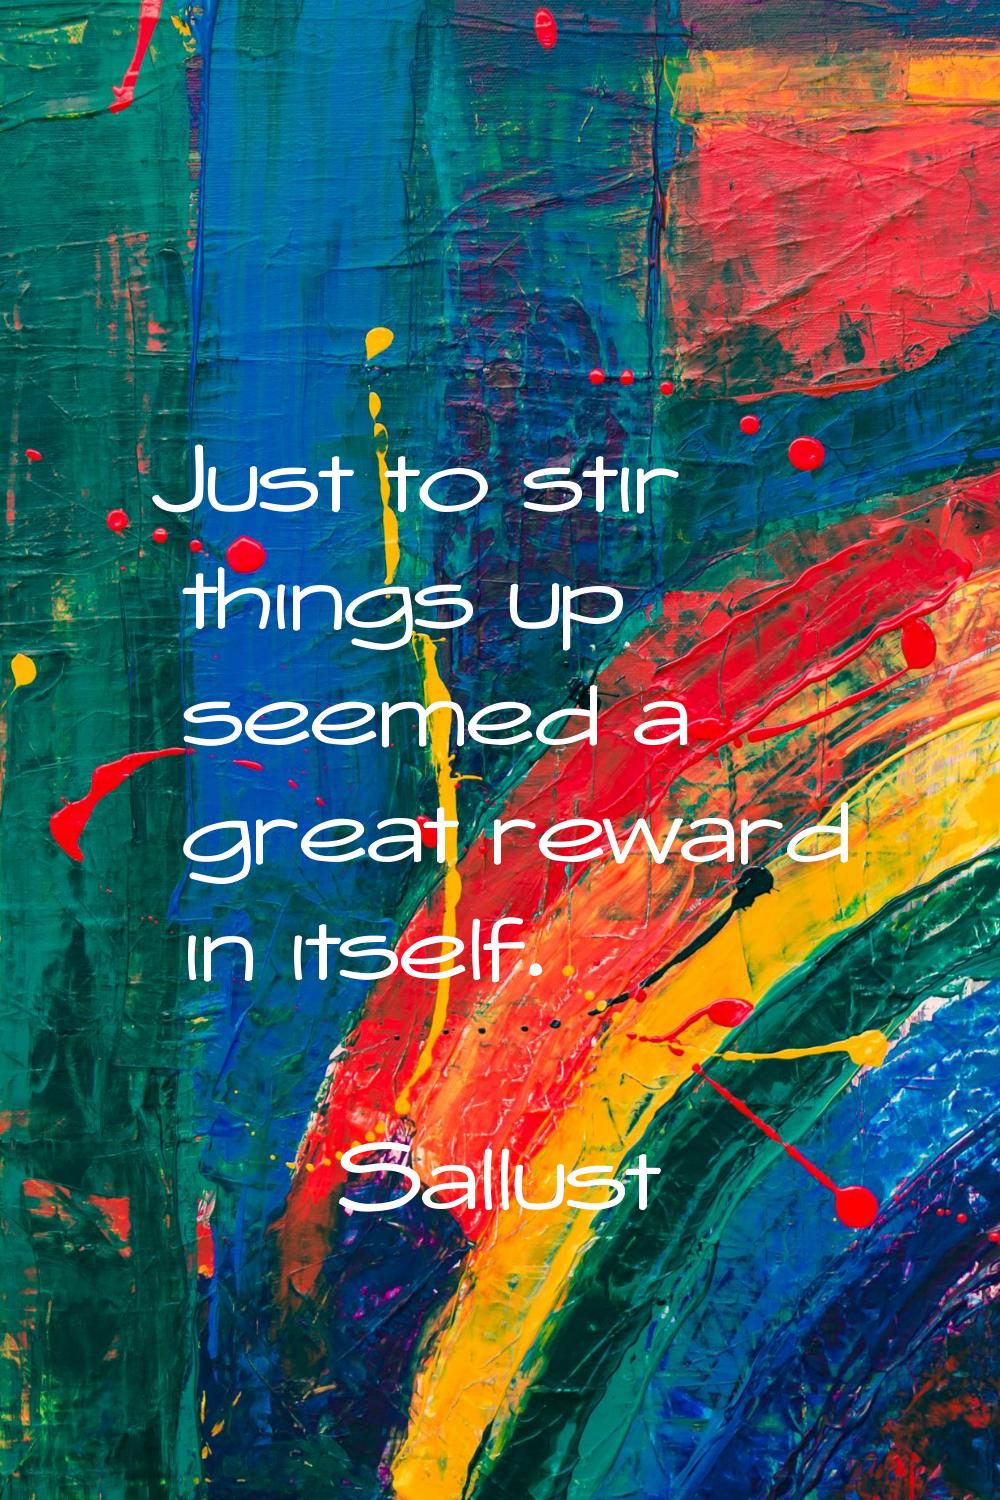 Just to stir things up seemed a great reward in itself.